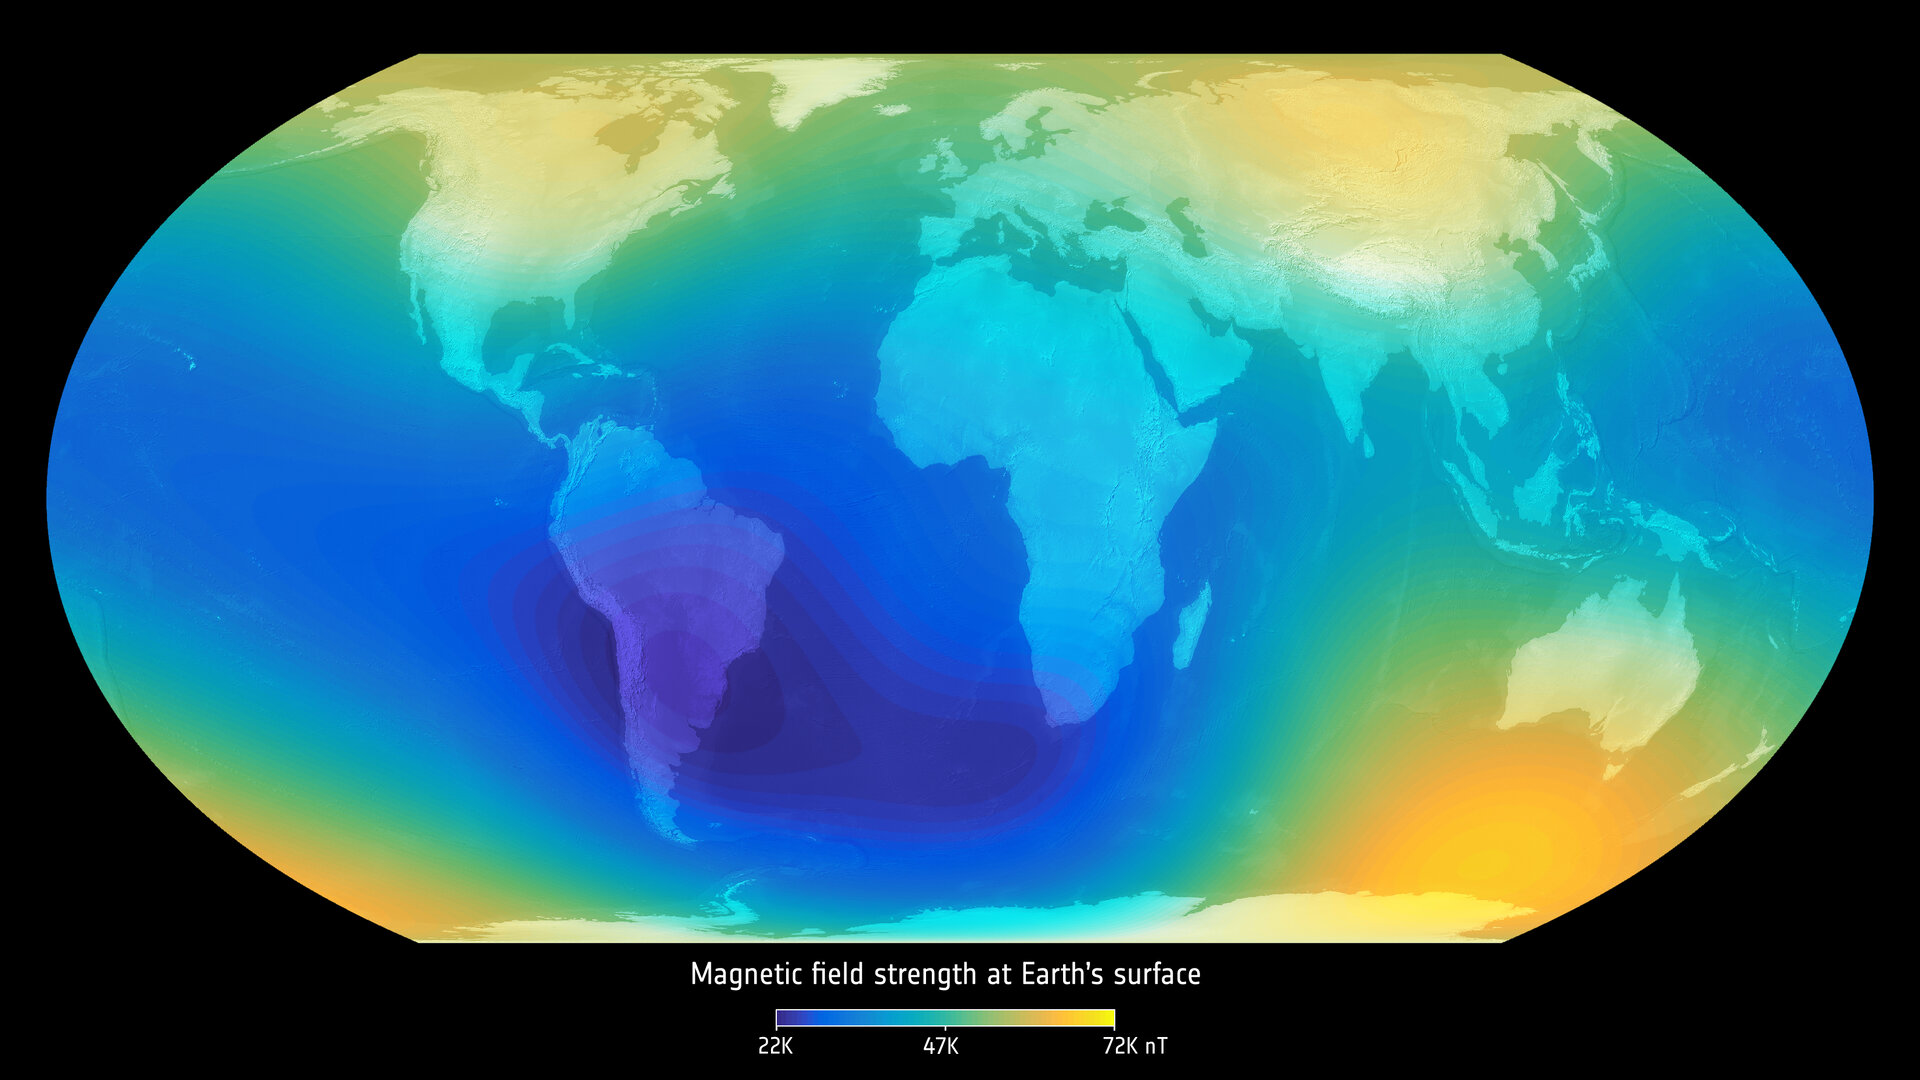 ESA - Strength of magnetic field surface